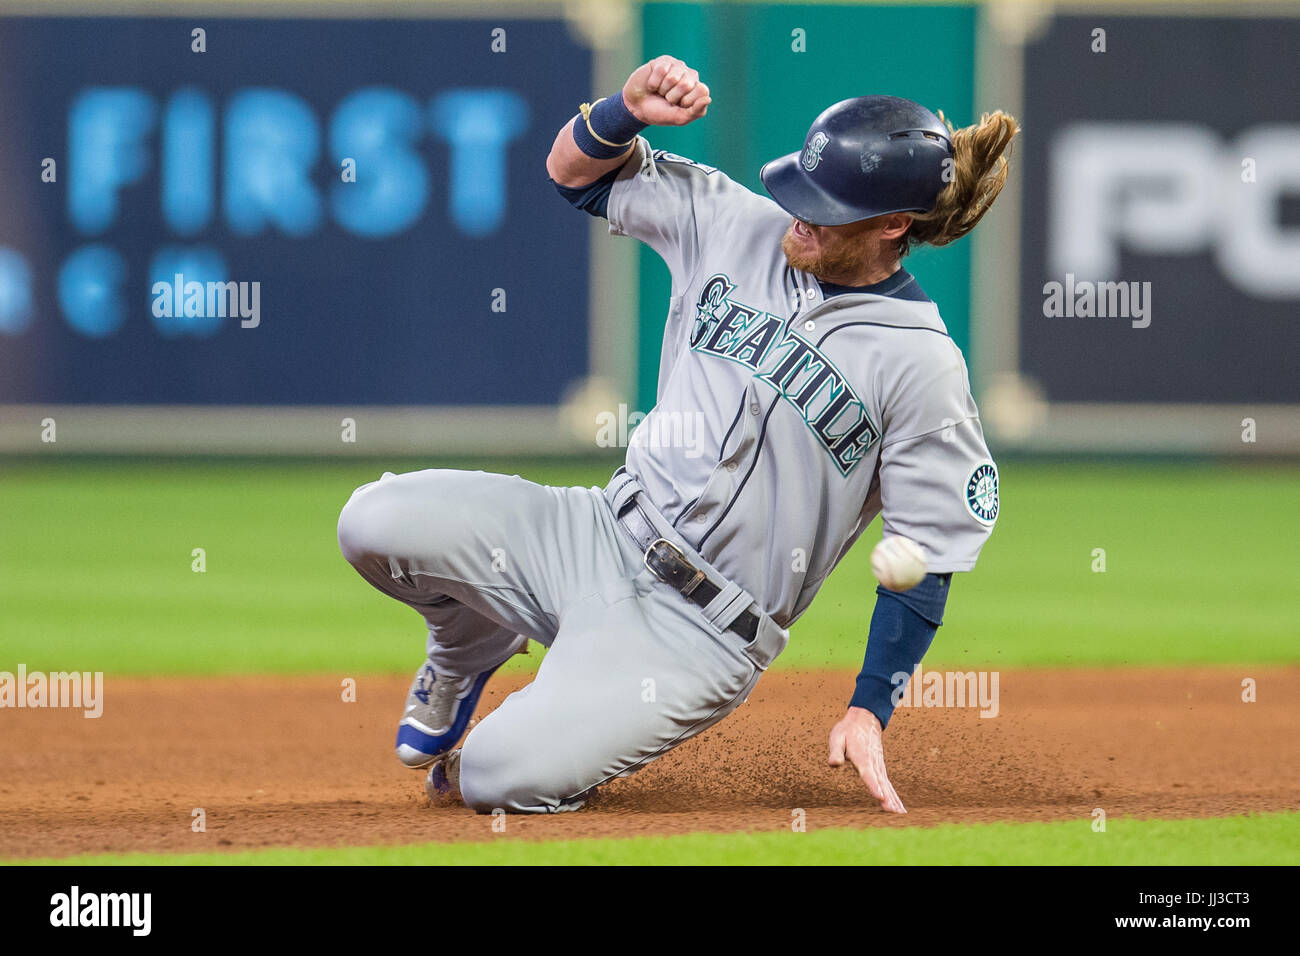 Houston, TX, USA. 17th July, 2017. Seattle Mariners right fielder Ben Gamel (16) safely slides into 2nd base during a Major League Baseball game between the Houston Astros and the Seattle Mariners at Minute Maid Park in Houston, TX. Trask Smith/CSM/Alamy Live News Stock Photo